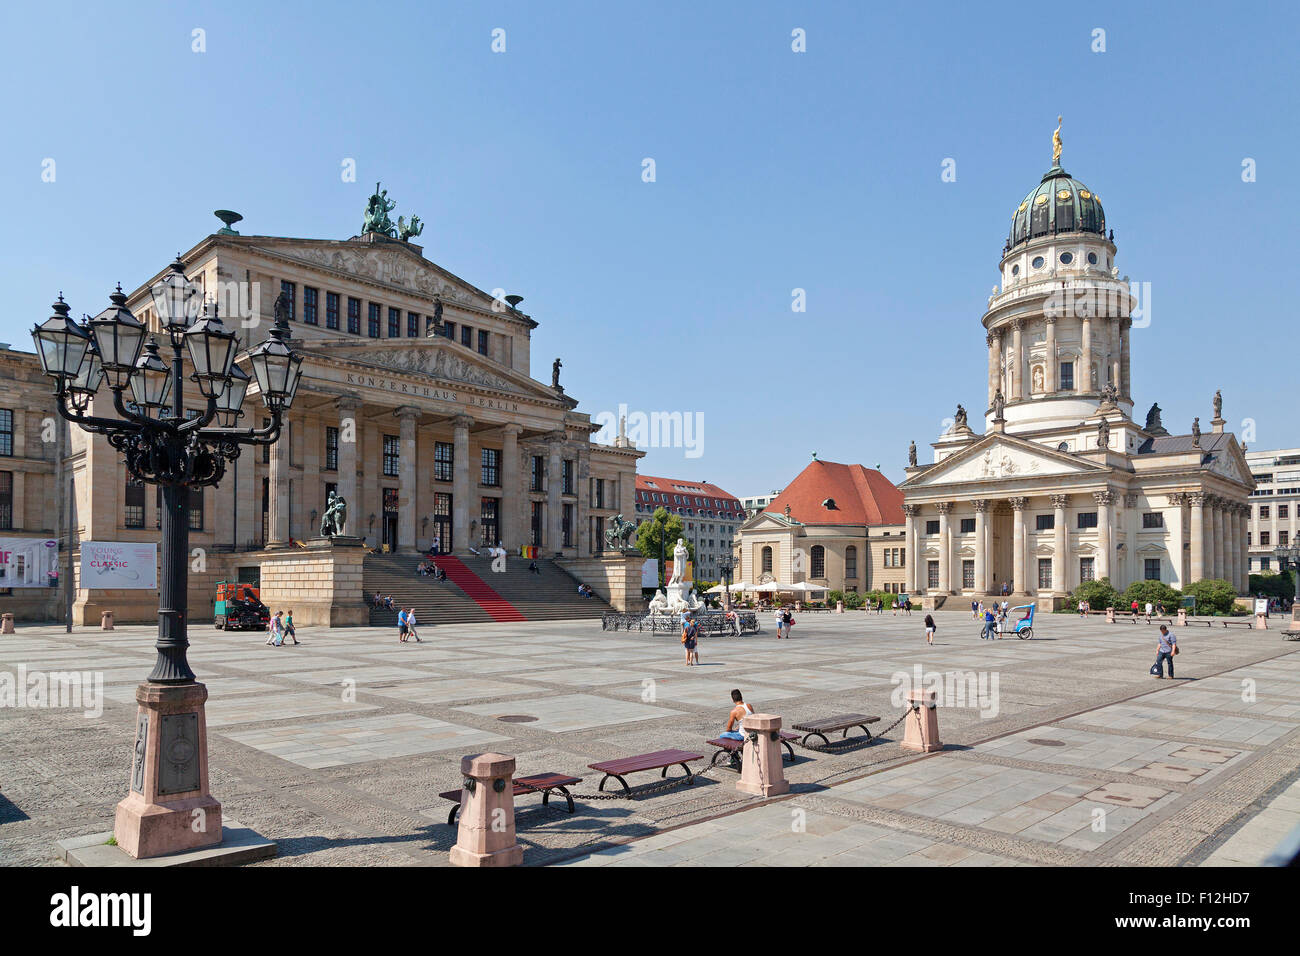 concert house and French Cathedral, Gendarmenmarkt, Berlin, Germany Stock Photo